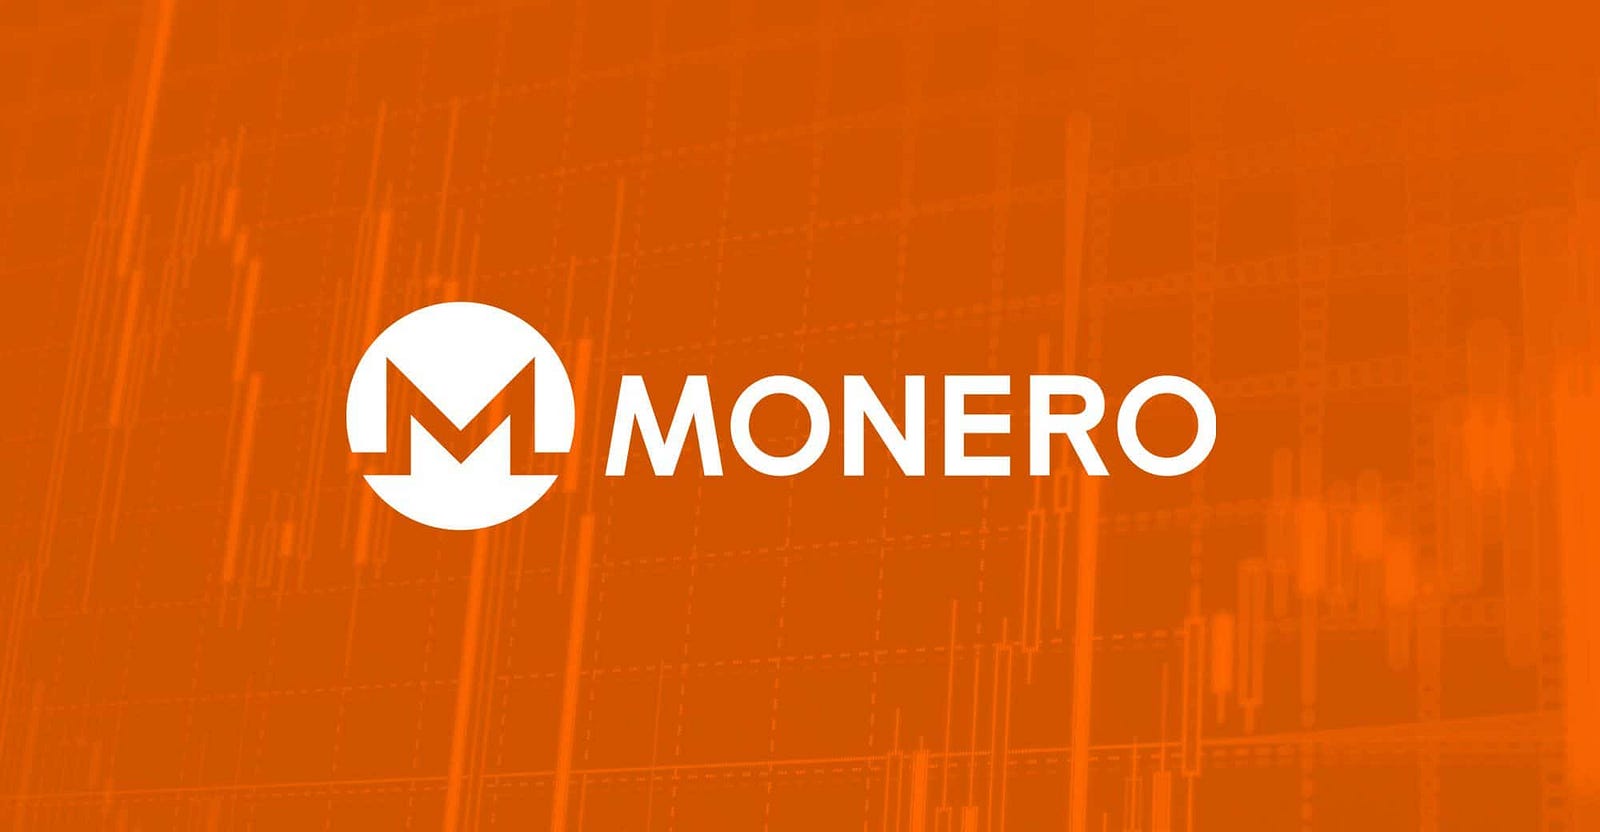 Monero Private Pool Best Way To Buy Bitcoins In Us To Make Money - 